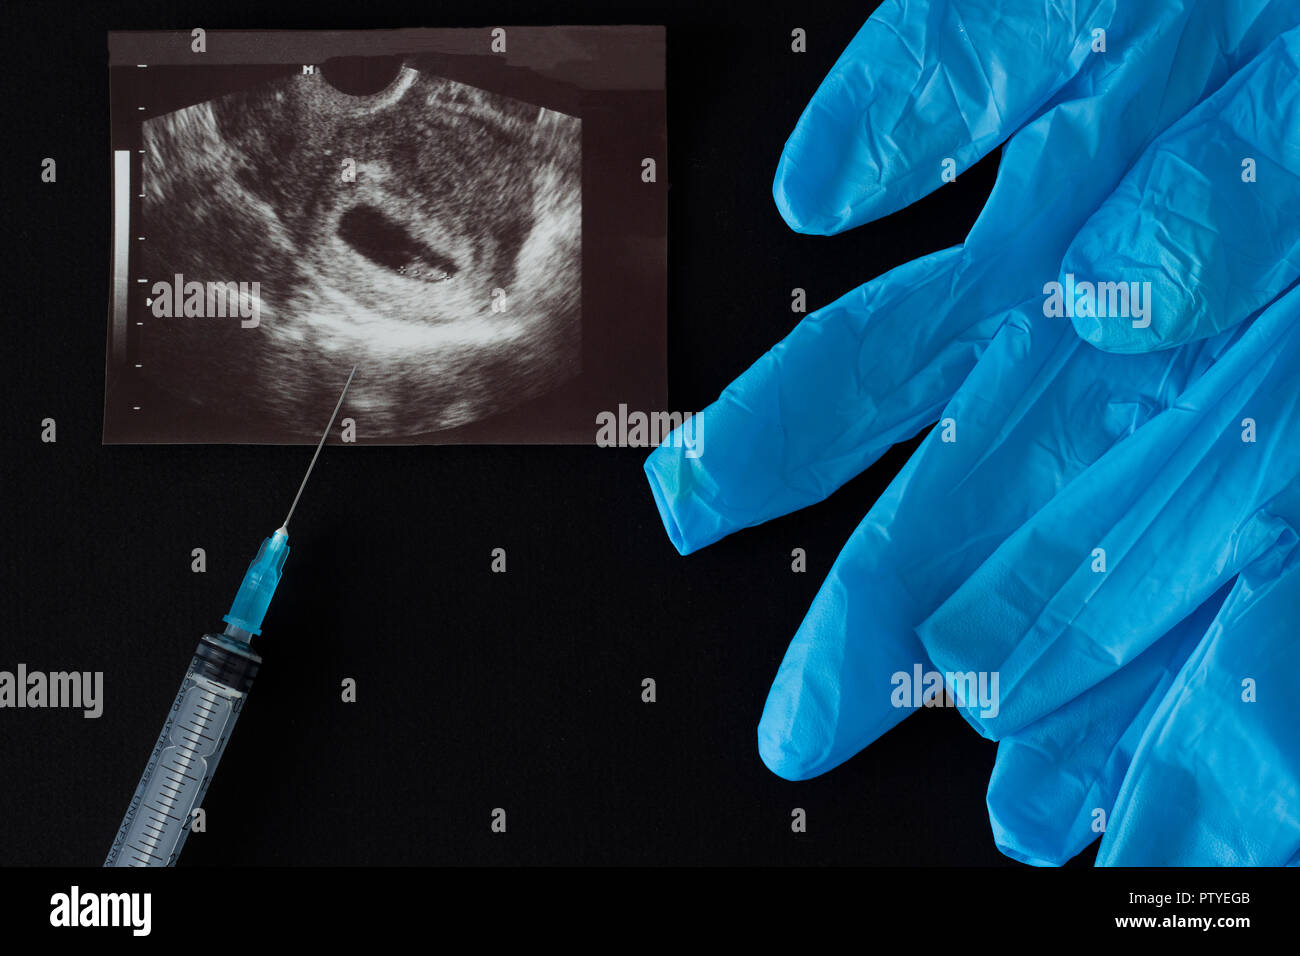 A picture of a uzi, a syringe, an abortion, medical gloves, a black background Stock Photo